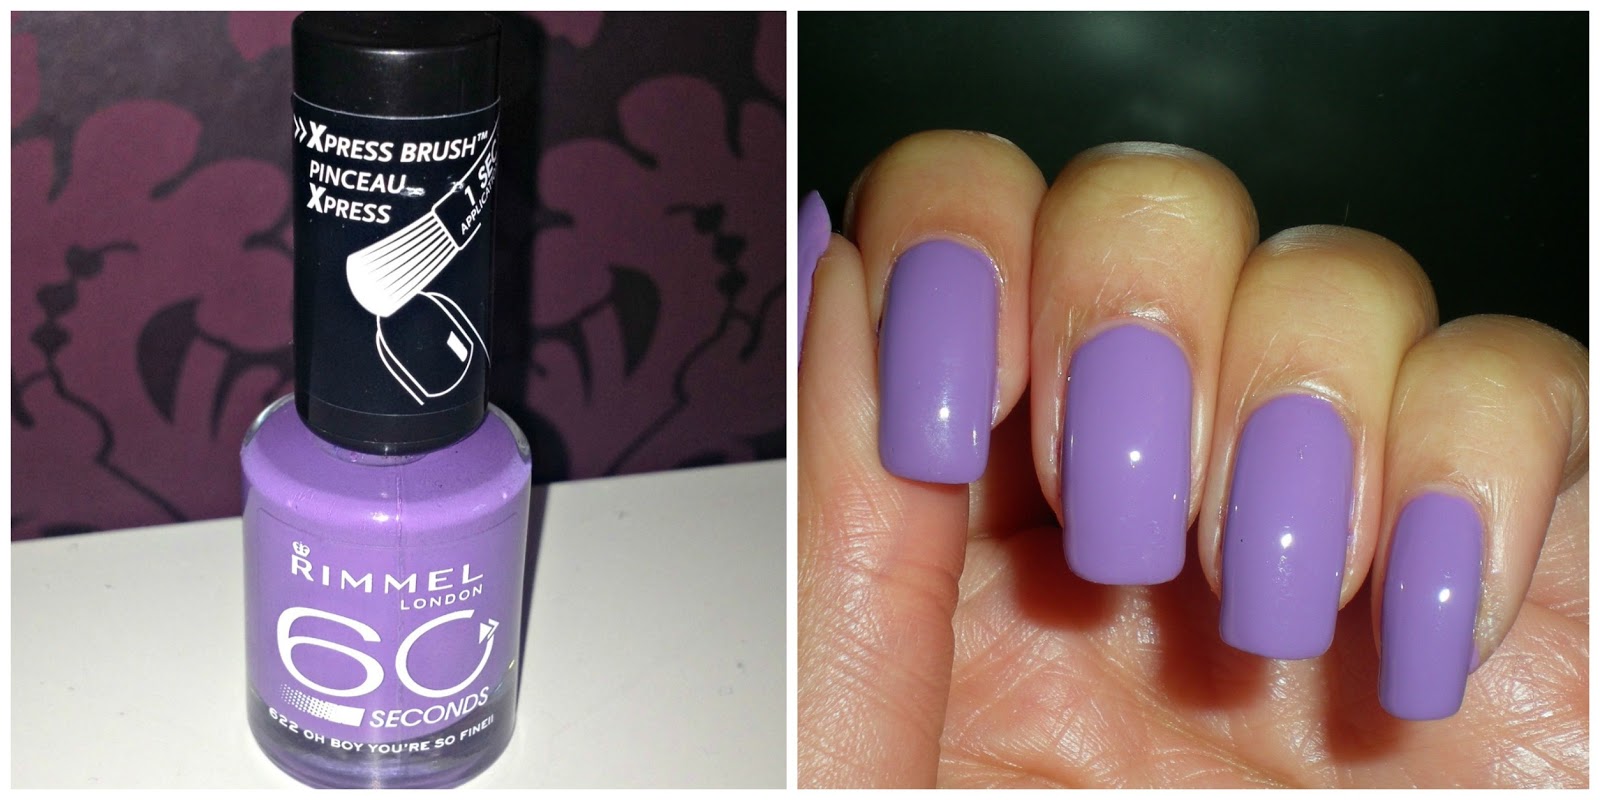 7. "Mauve Mood" Nail Varnish by Butter London - wide 7